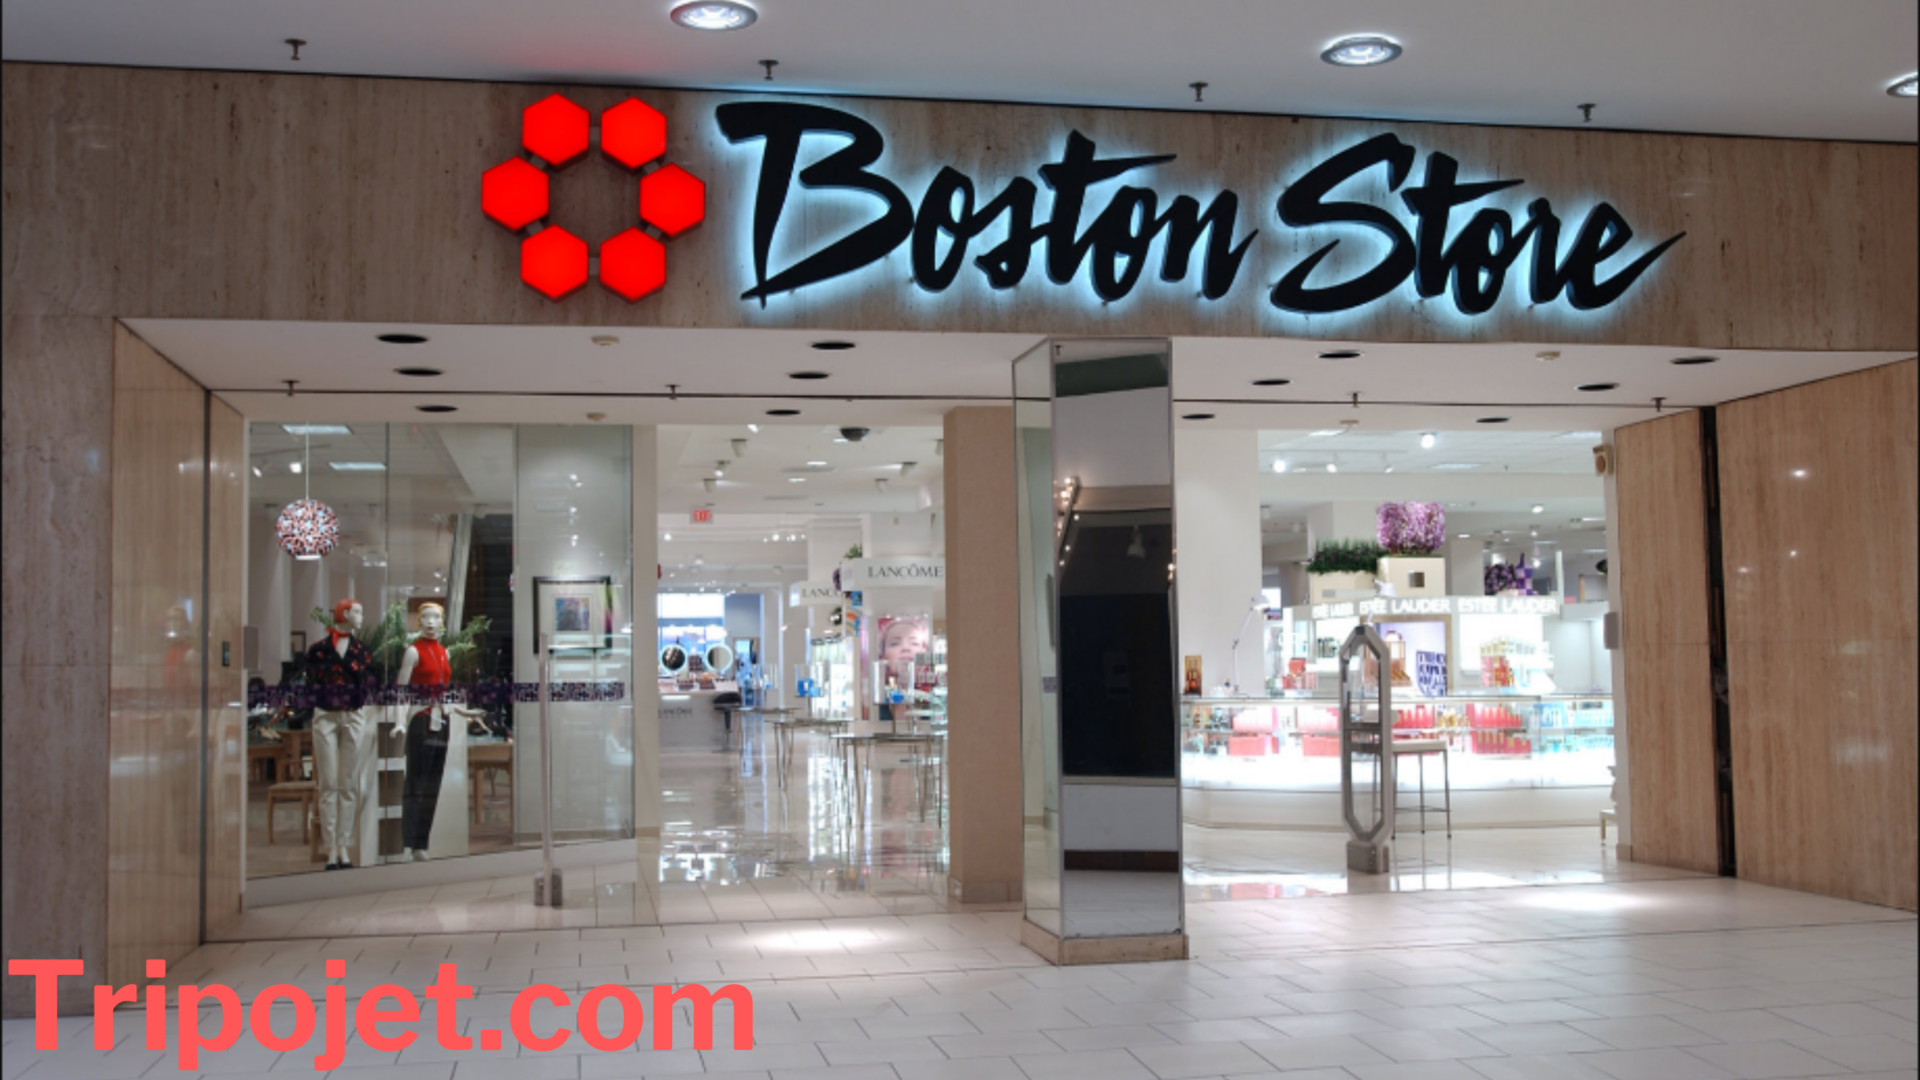 What Time Does Boston Store Open?